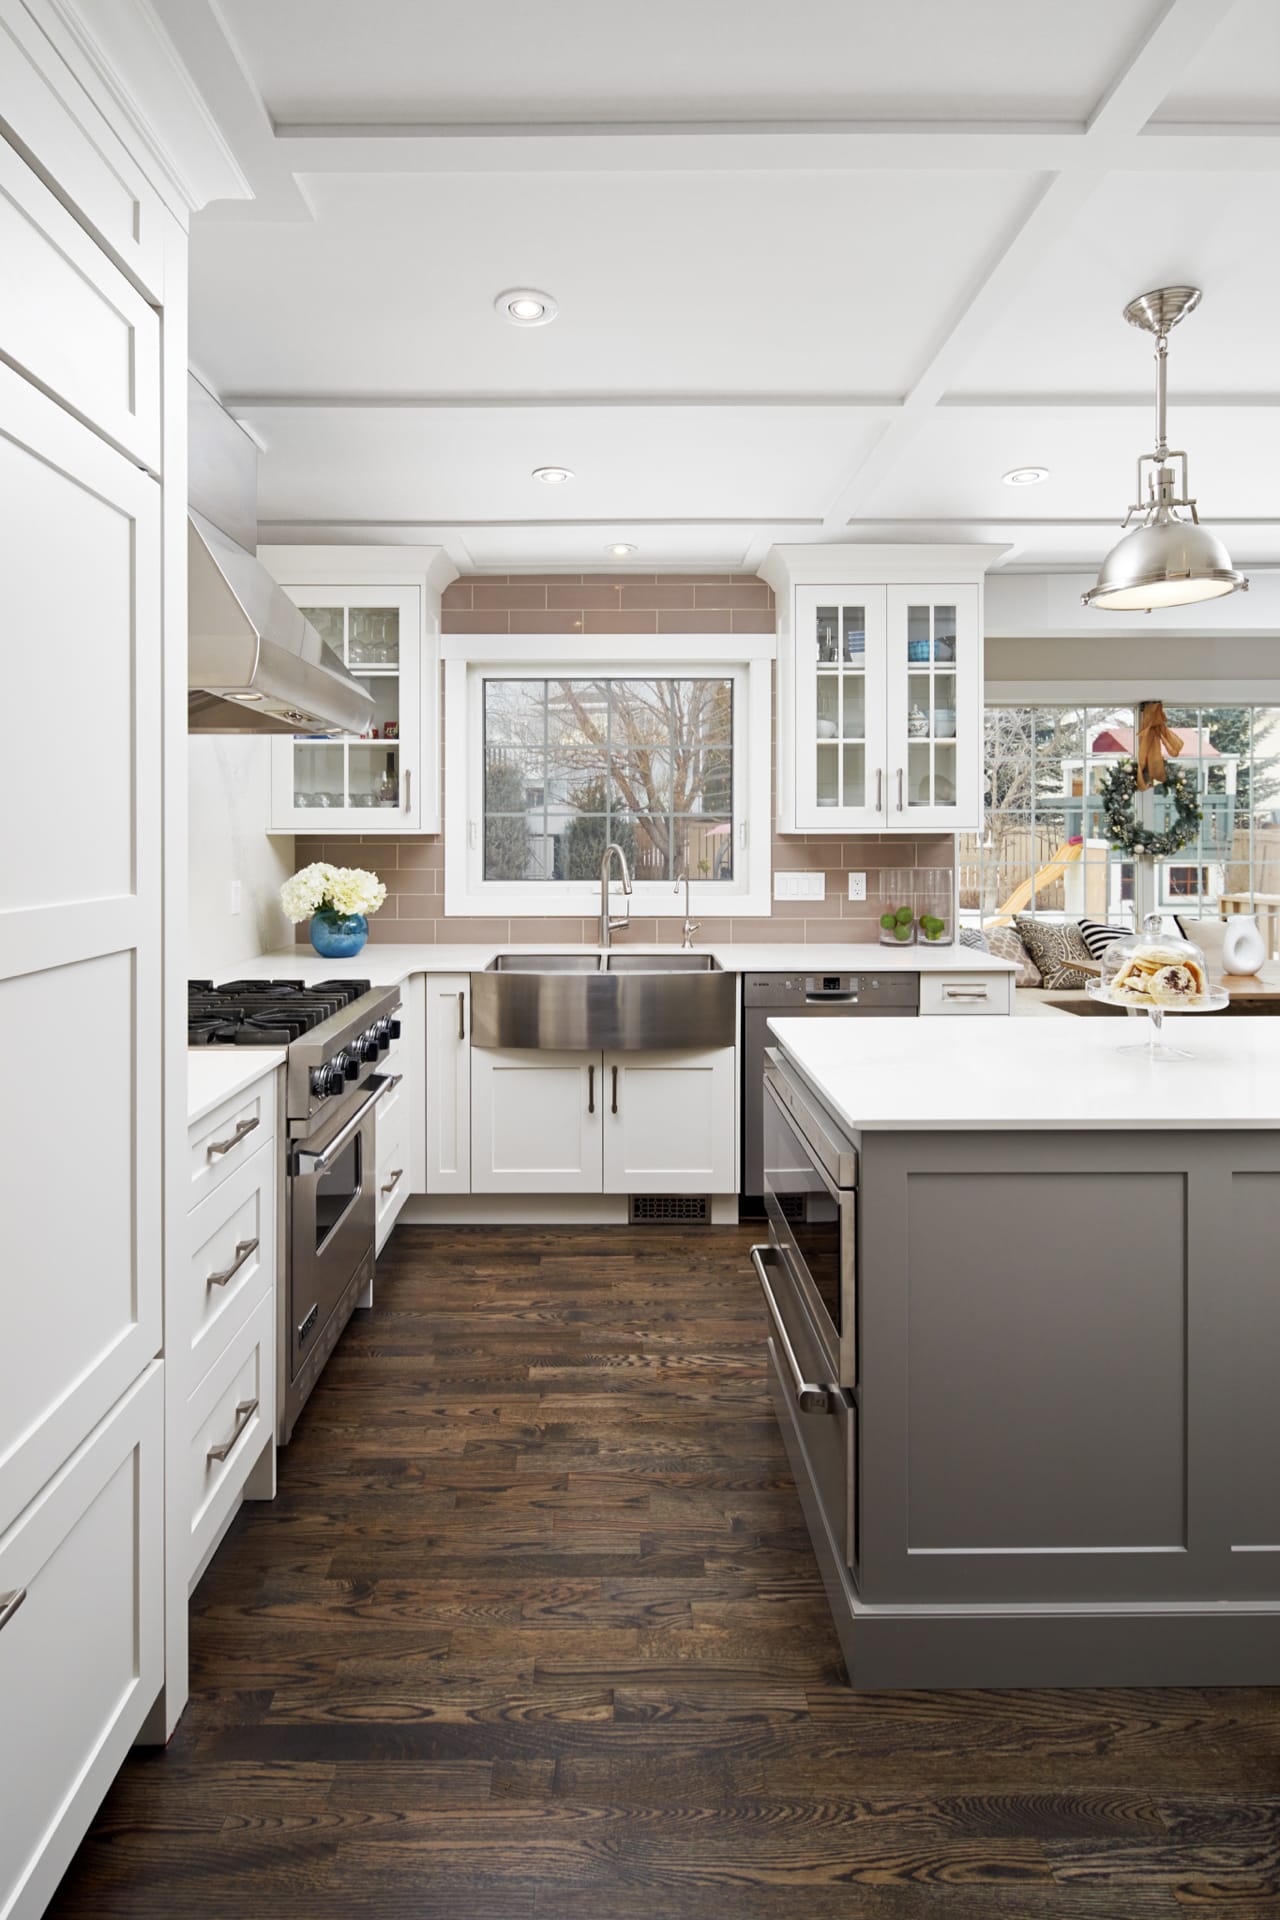 Transitional style kitchen with a perimeter of white shaker cabinetry, a grey island and stainless kitchen accessories.